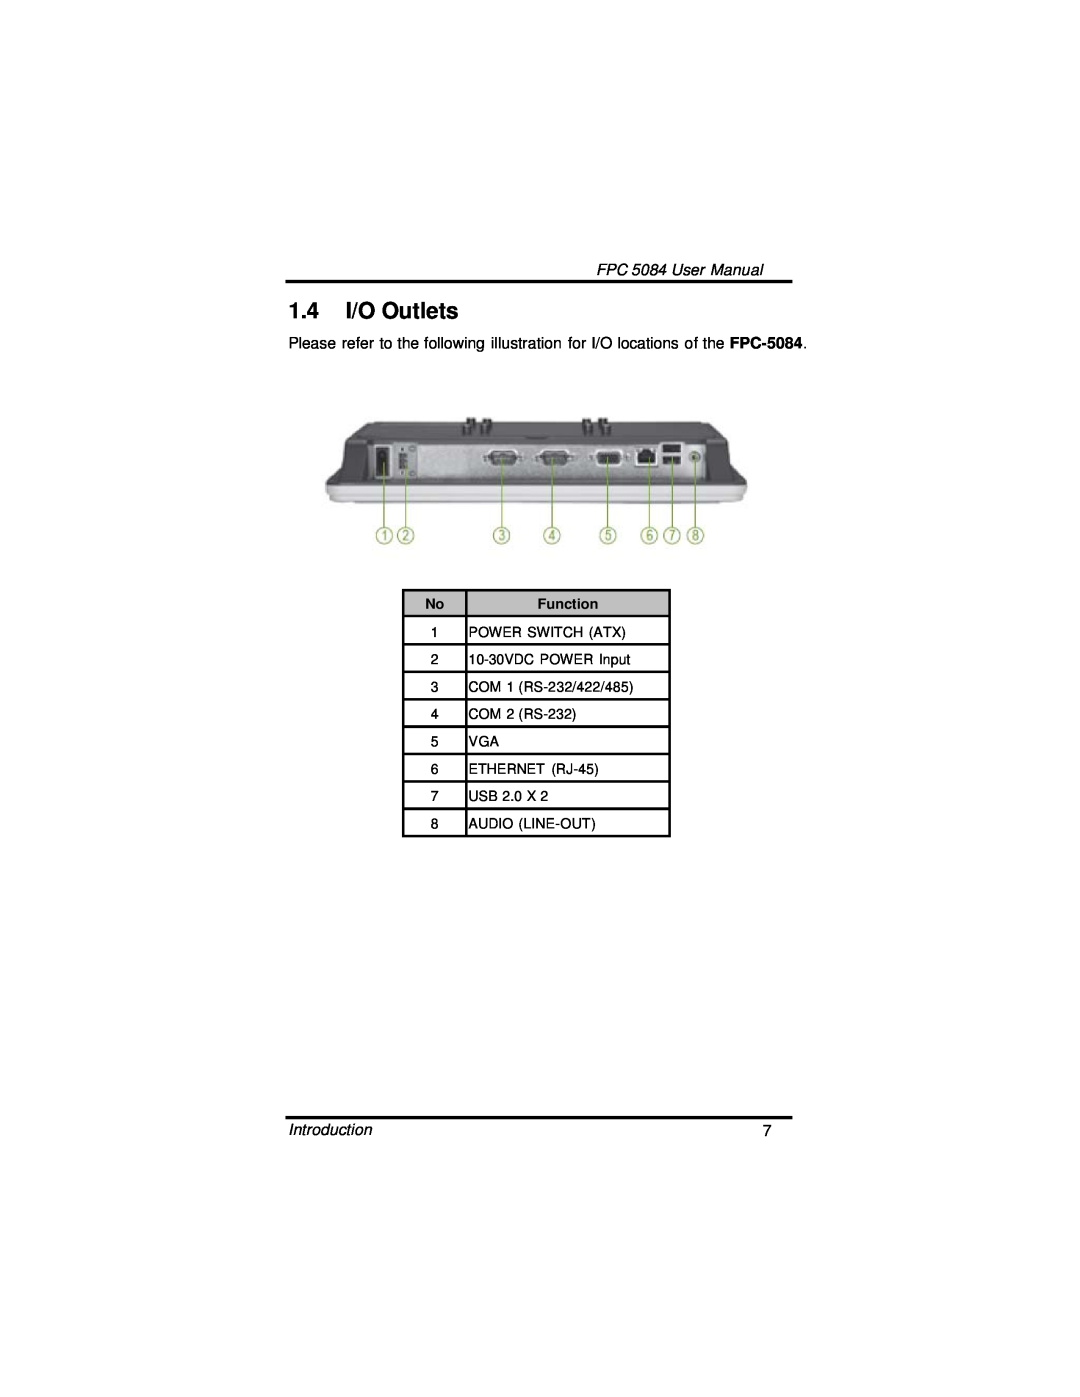 Intel N270, FPC 5084 user manual 1.4 I/O Outlets, Function 